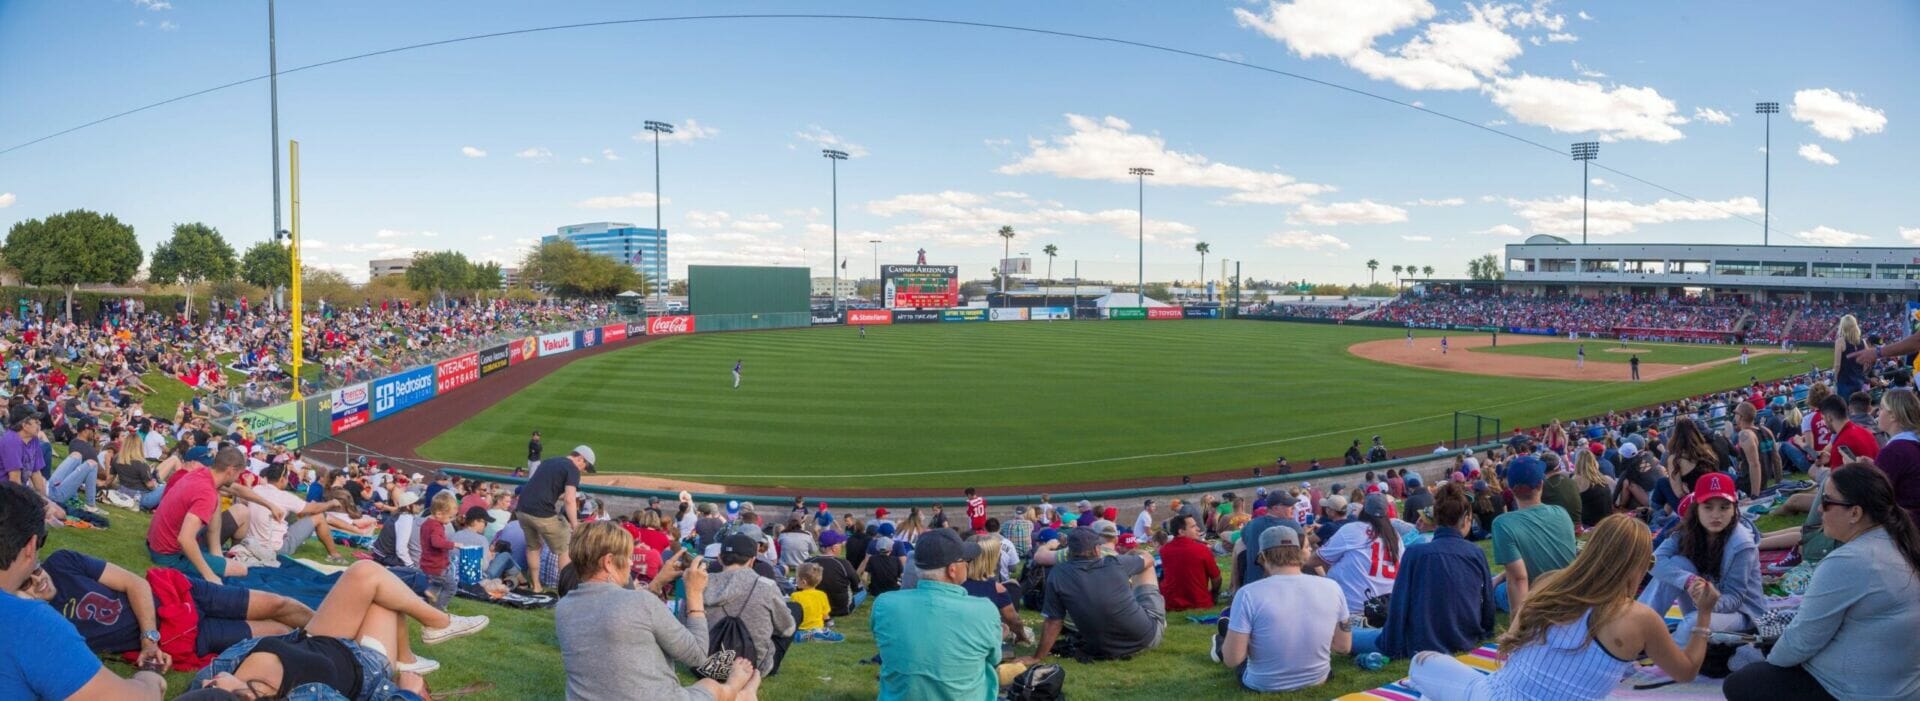 Our 2023 Spring Training schedule is - Oakland Athletics